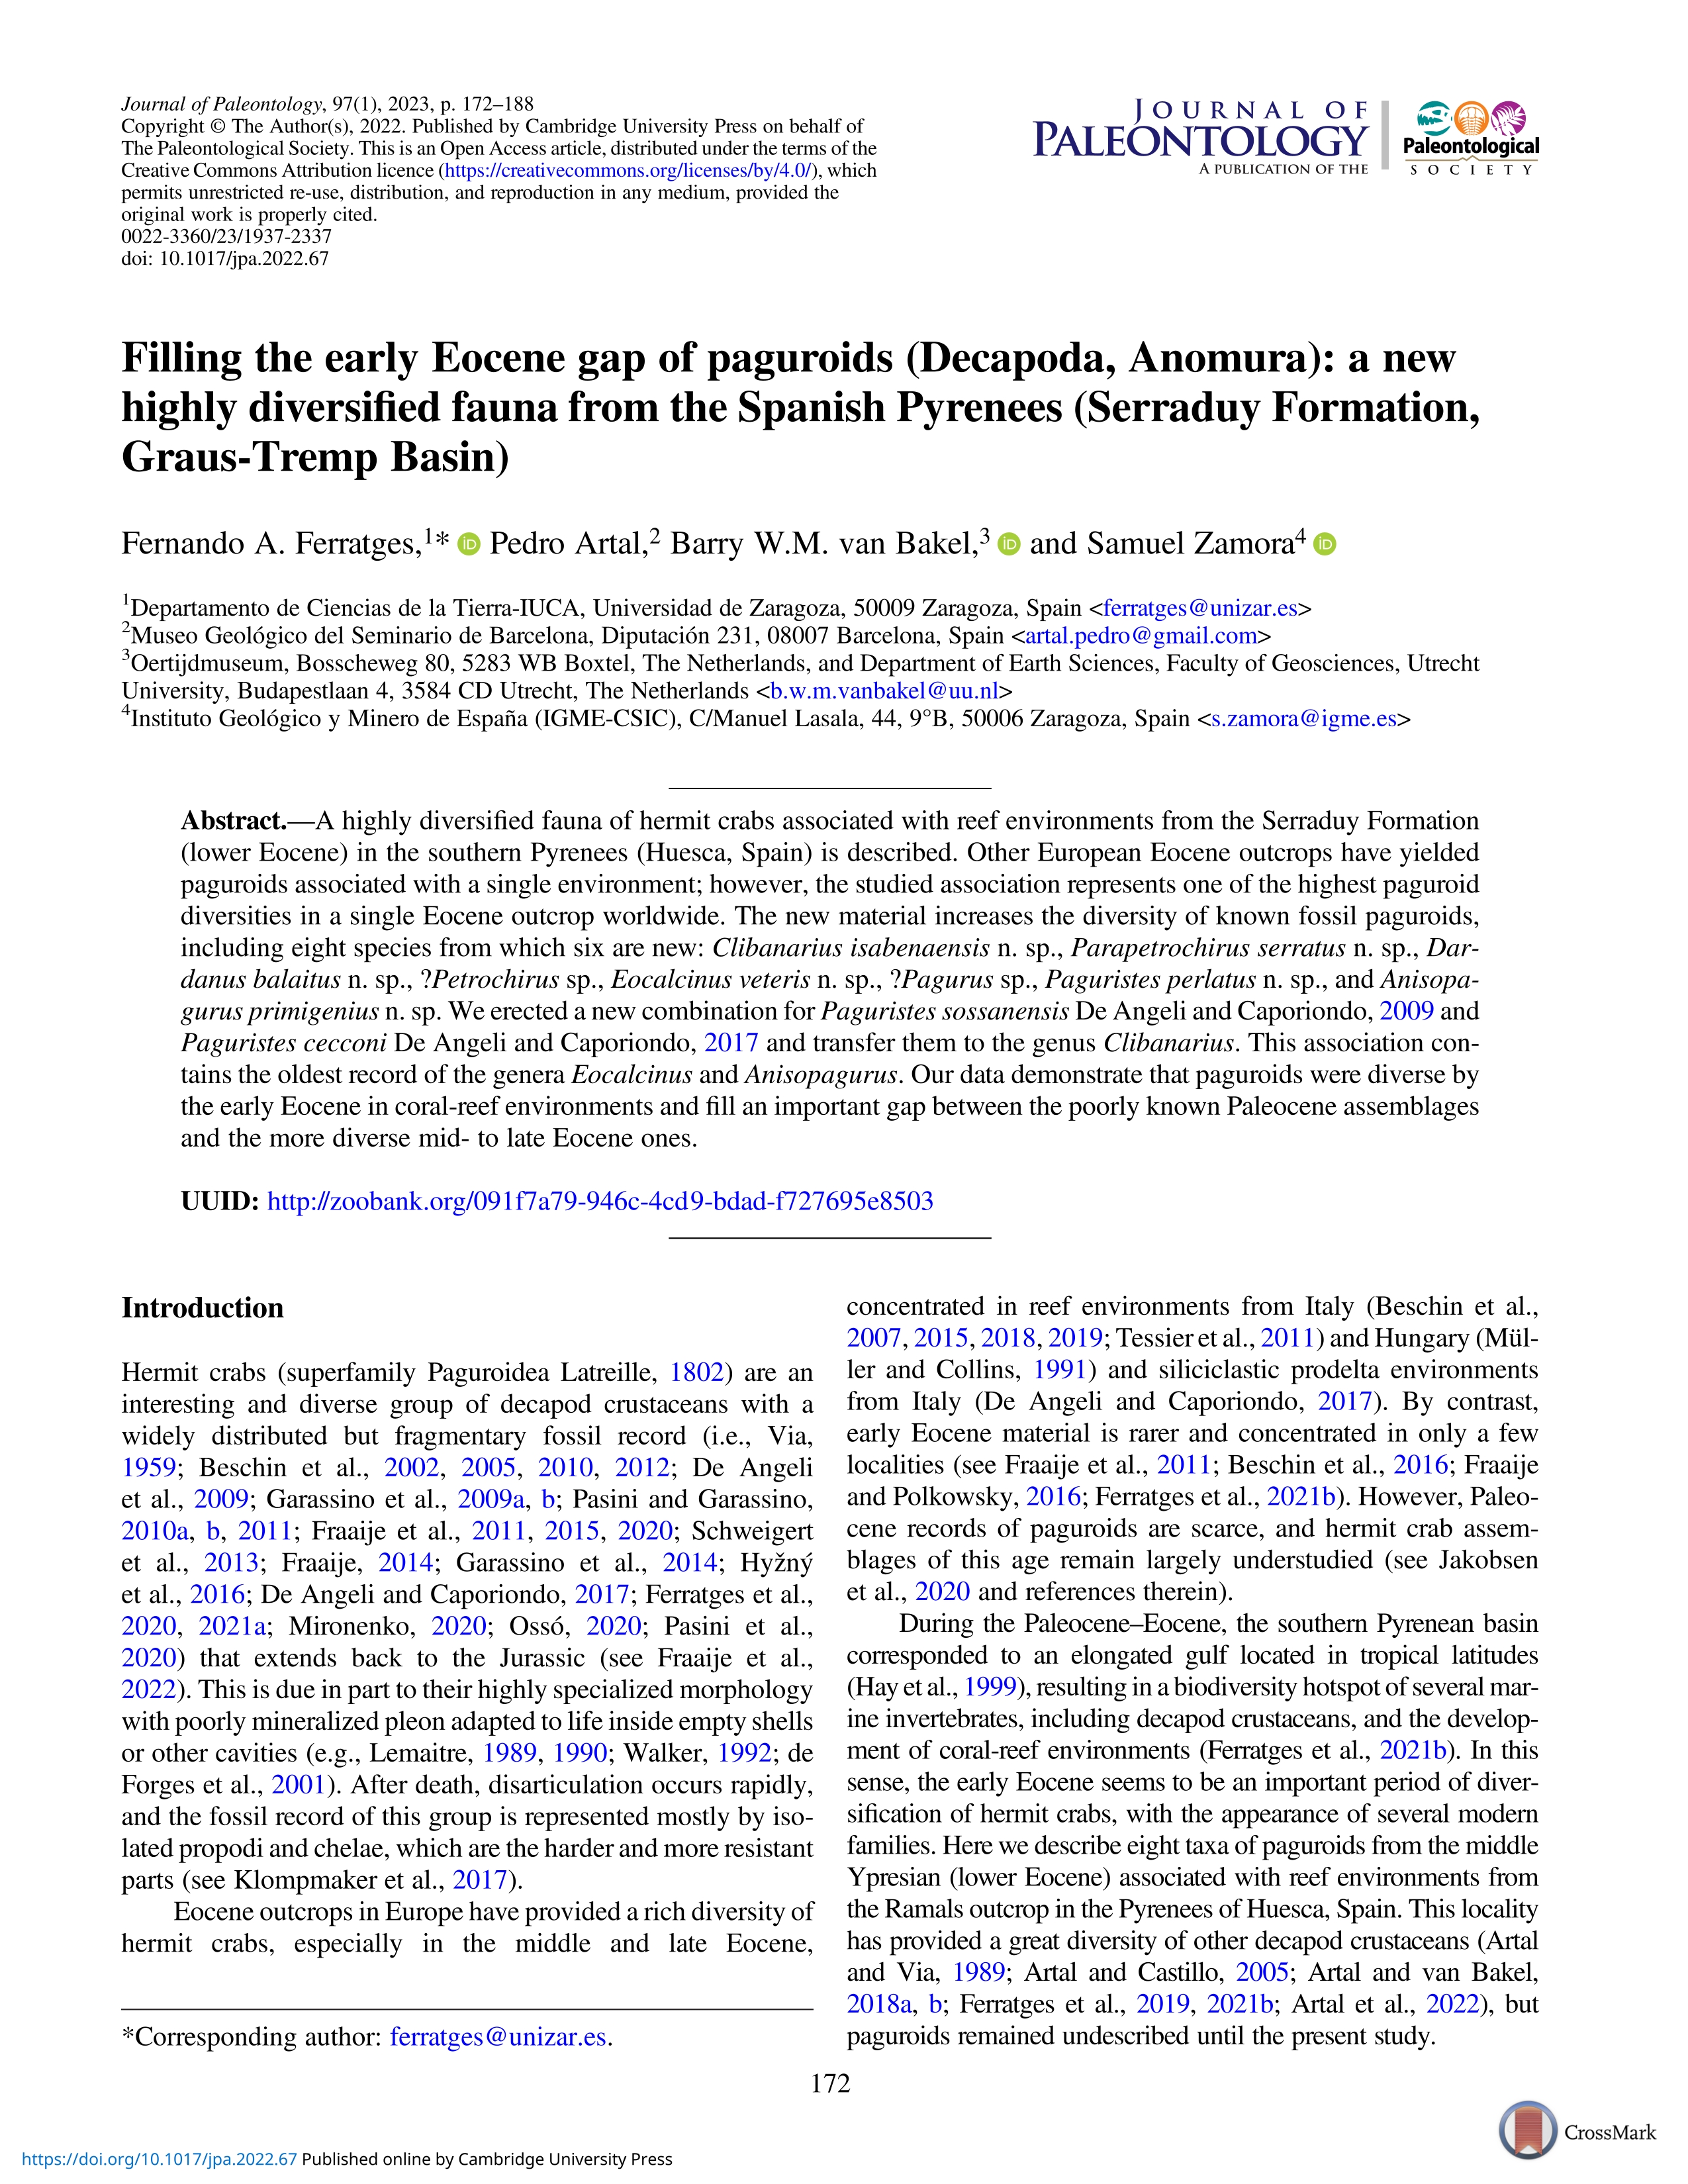 Filling the early Eocene gap of paguroids (Decapoda, Anomura): a new highly diversified fauna from the Spanish Pyrenees (Serraduy Formation, Graus-Tremp Basin)